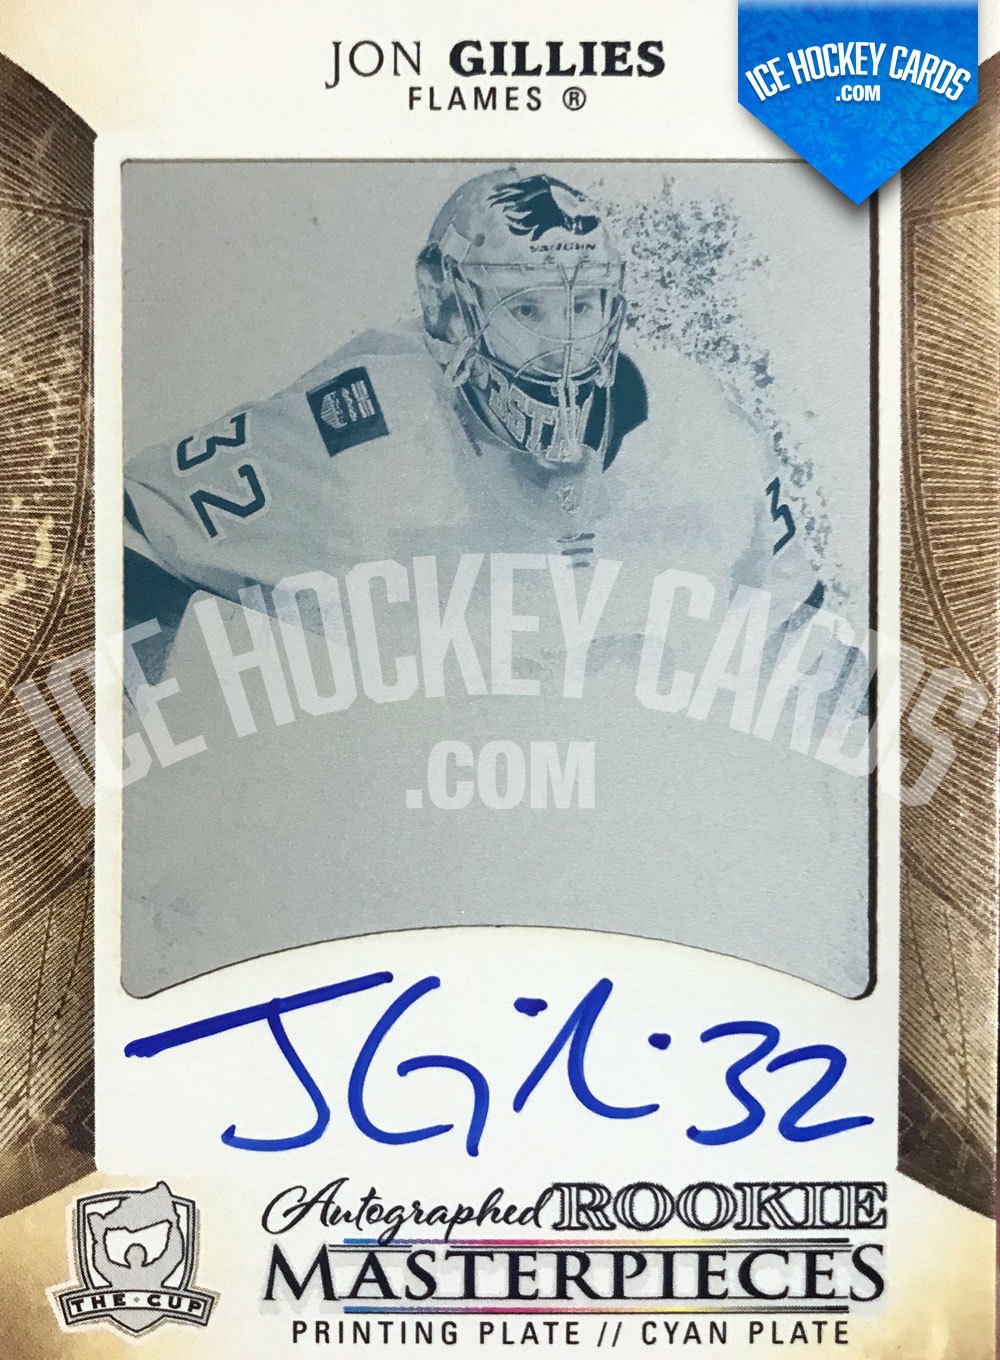 Upper Deck - The Cup 17-18 - Jon Gillies Printing Plate Auto Rookie RC 1 of 1 UNIQUE